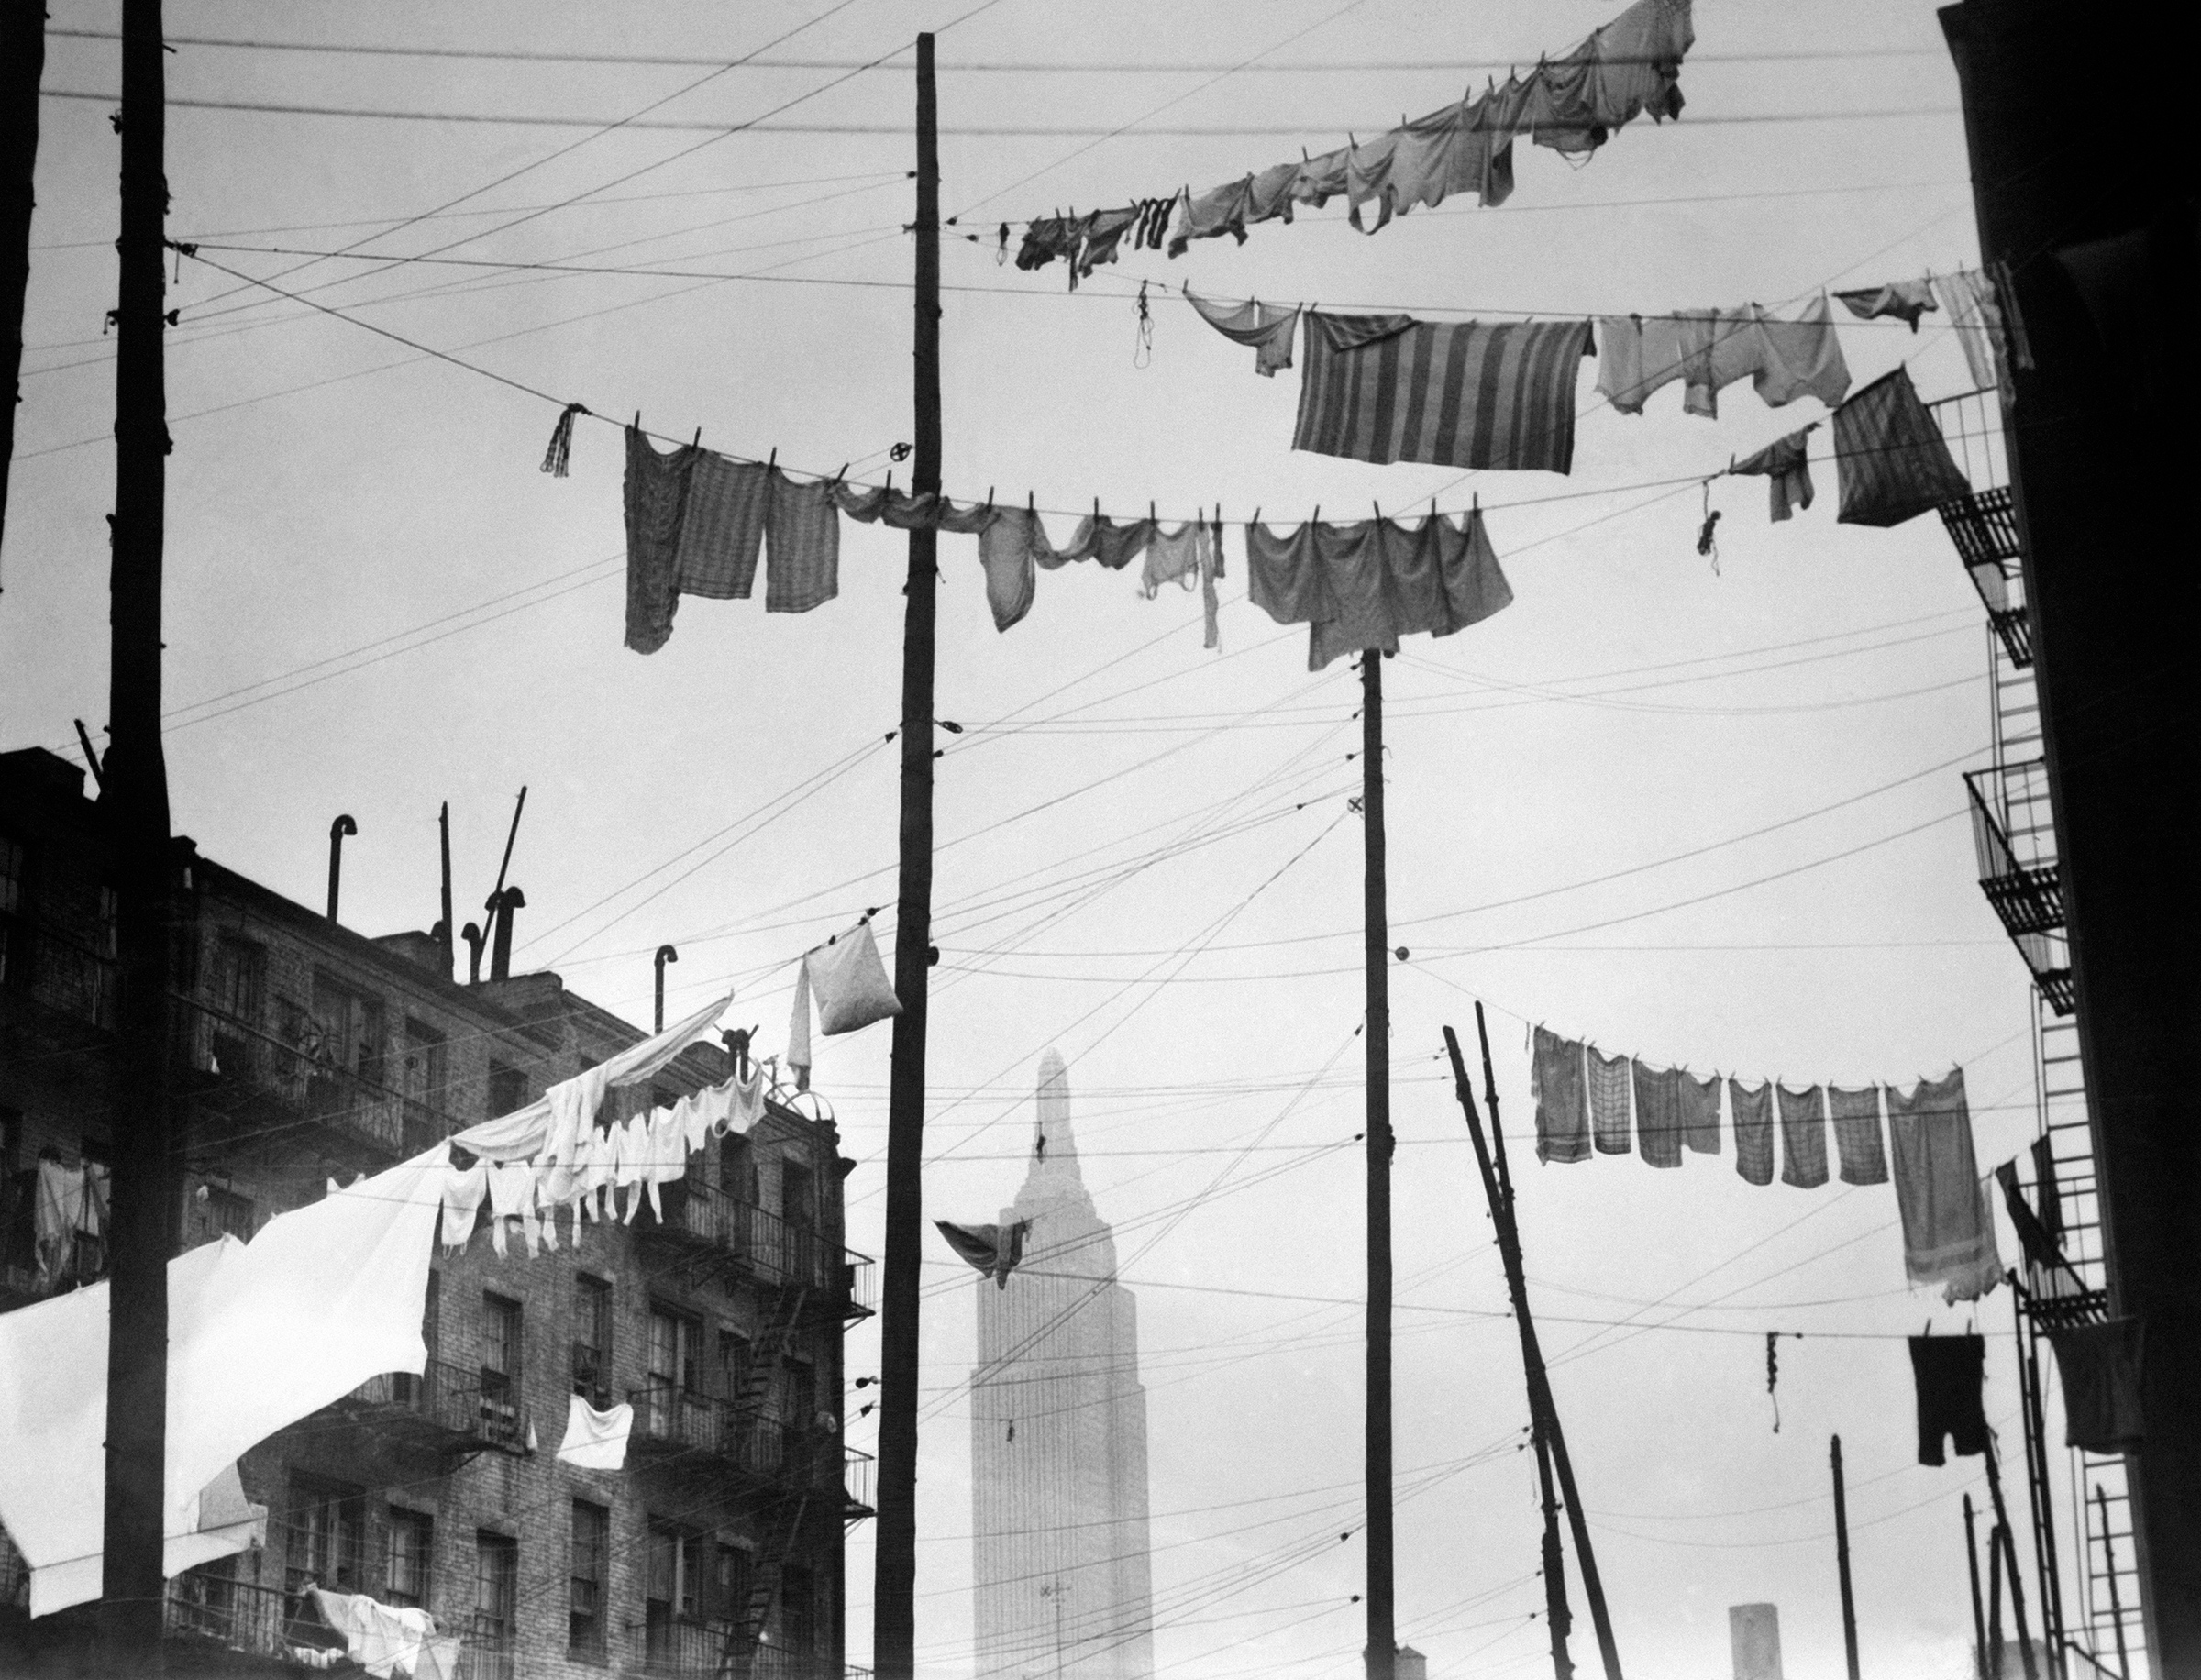 A view of the Empire State Building through clothes lines in New York City, Aug. 28, 1931.